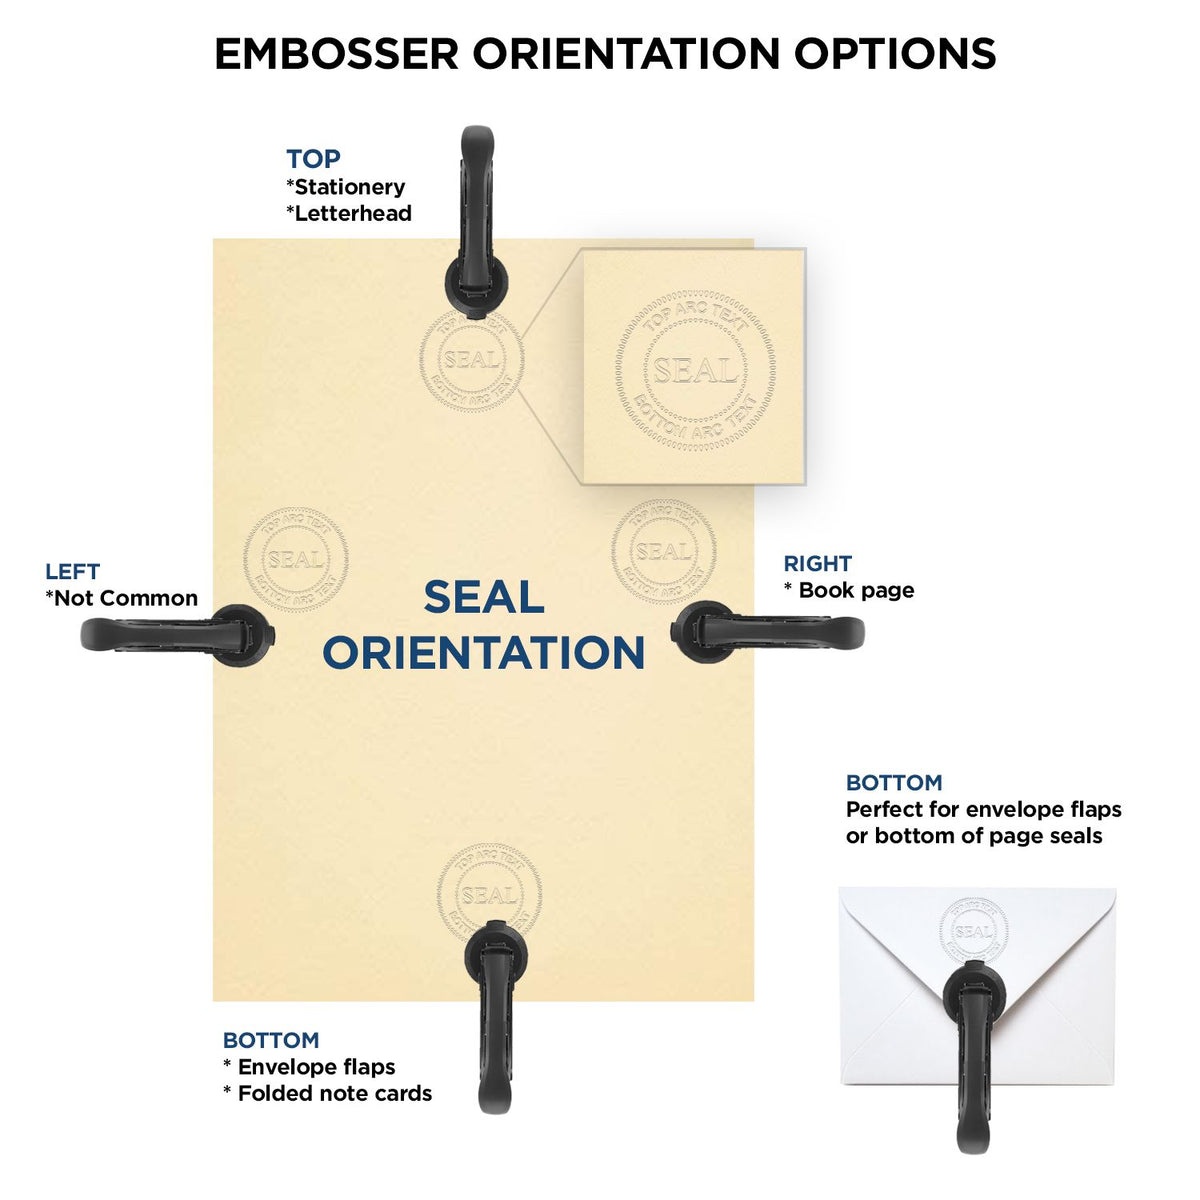 An infographic for the Pennsylvania Engineer Desk Seal showing embosser orientation, this is showing examples of a top, bottom, right and left insert.